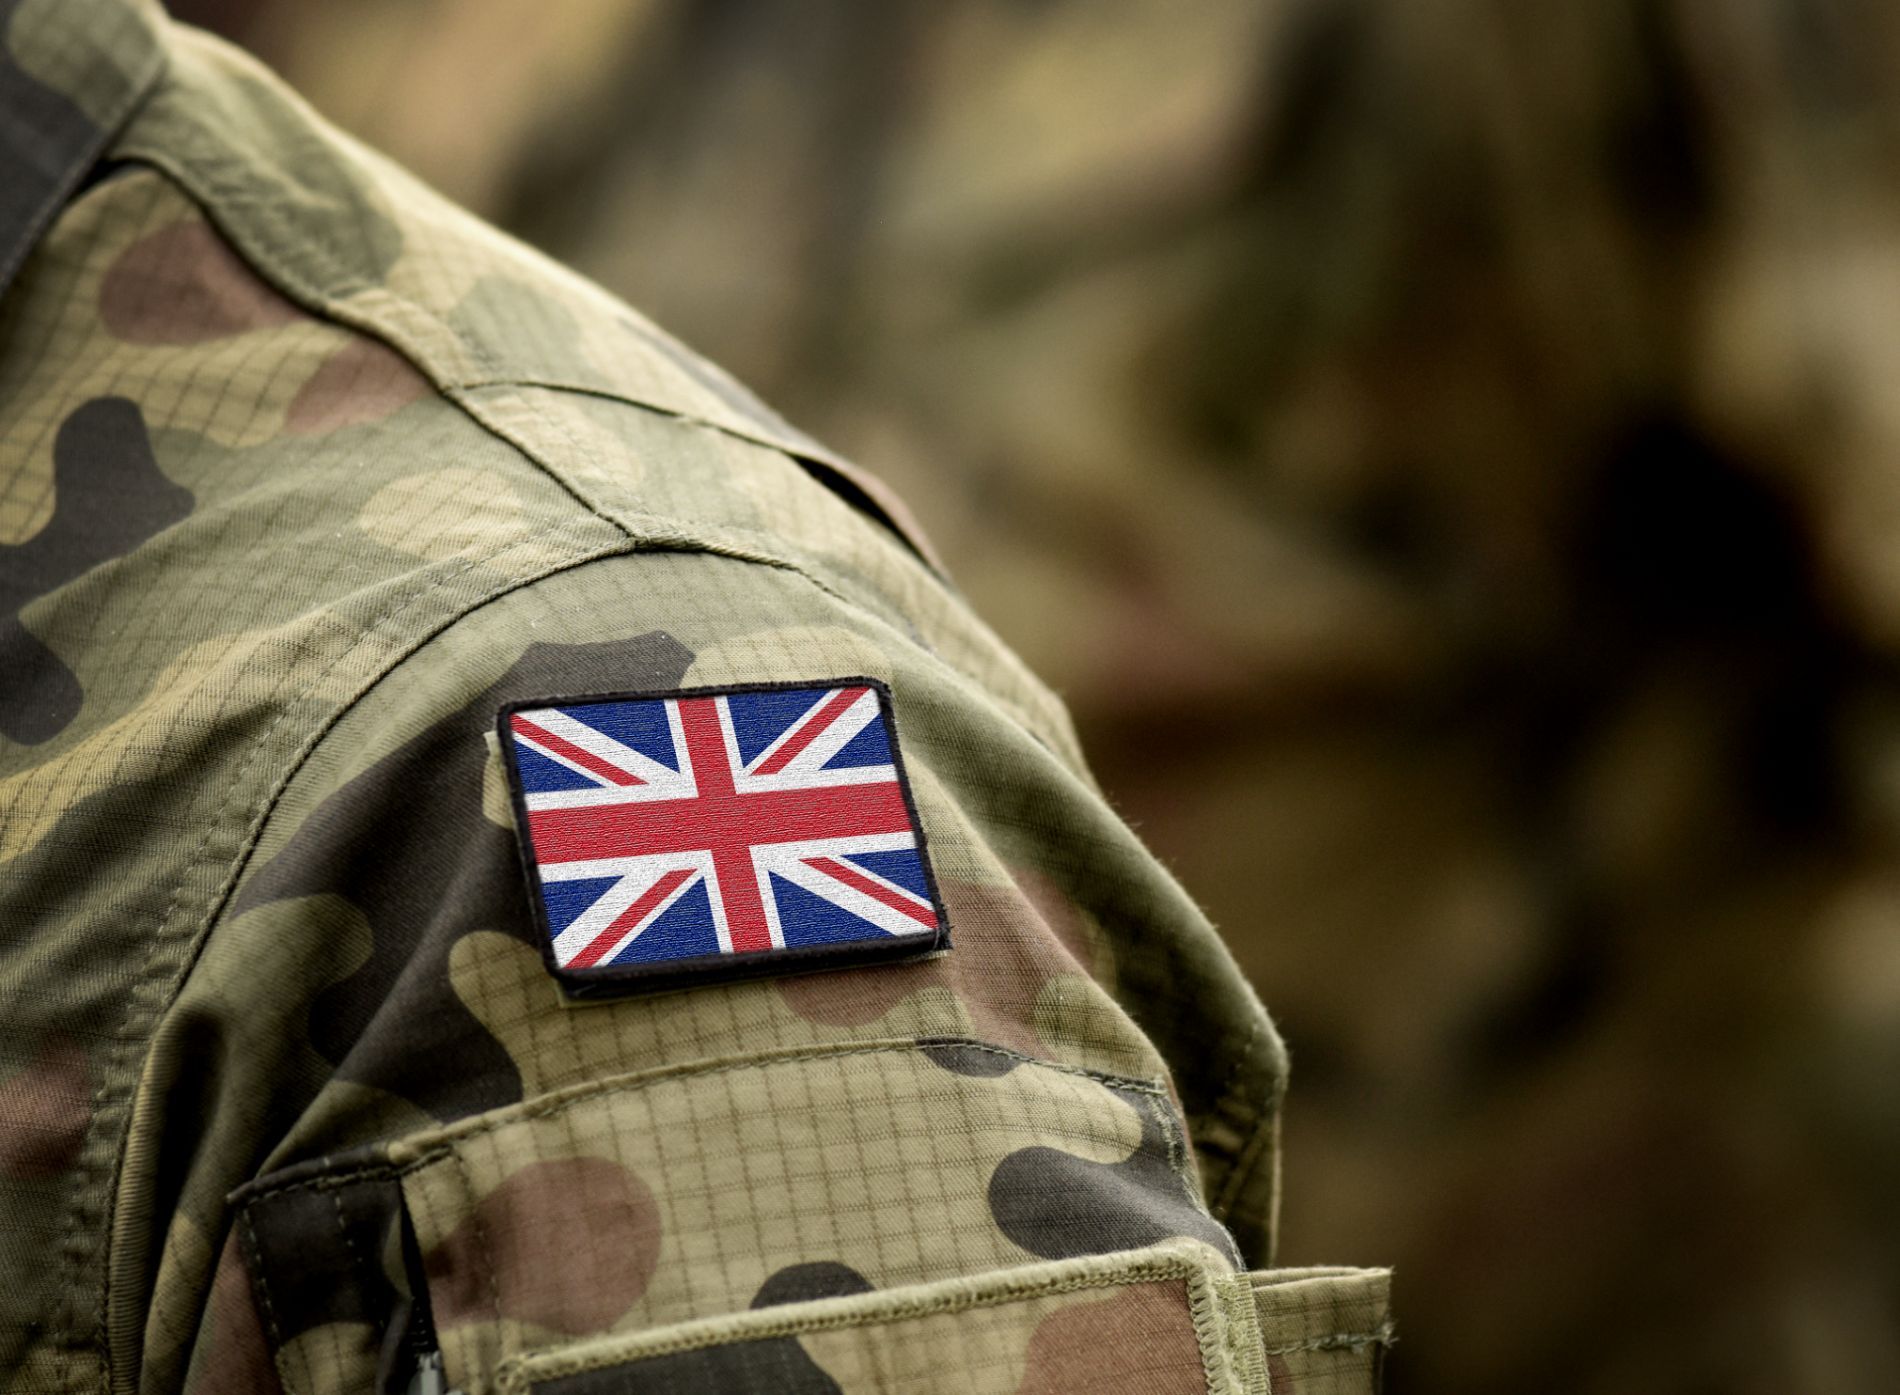 Closeup of a soldier in uniform with UK flag patch on his shoulder - commonwealth veterans